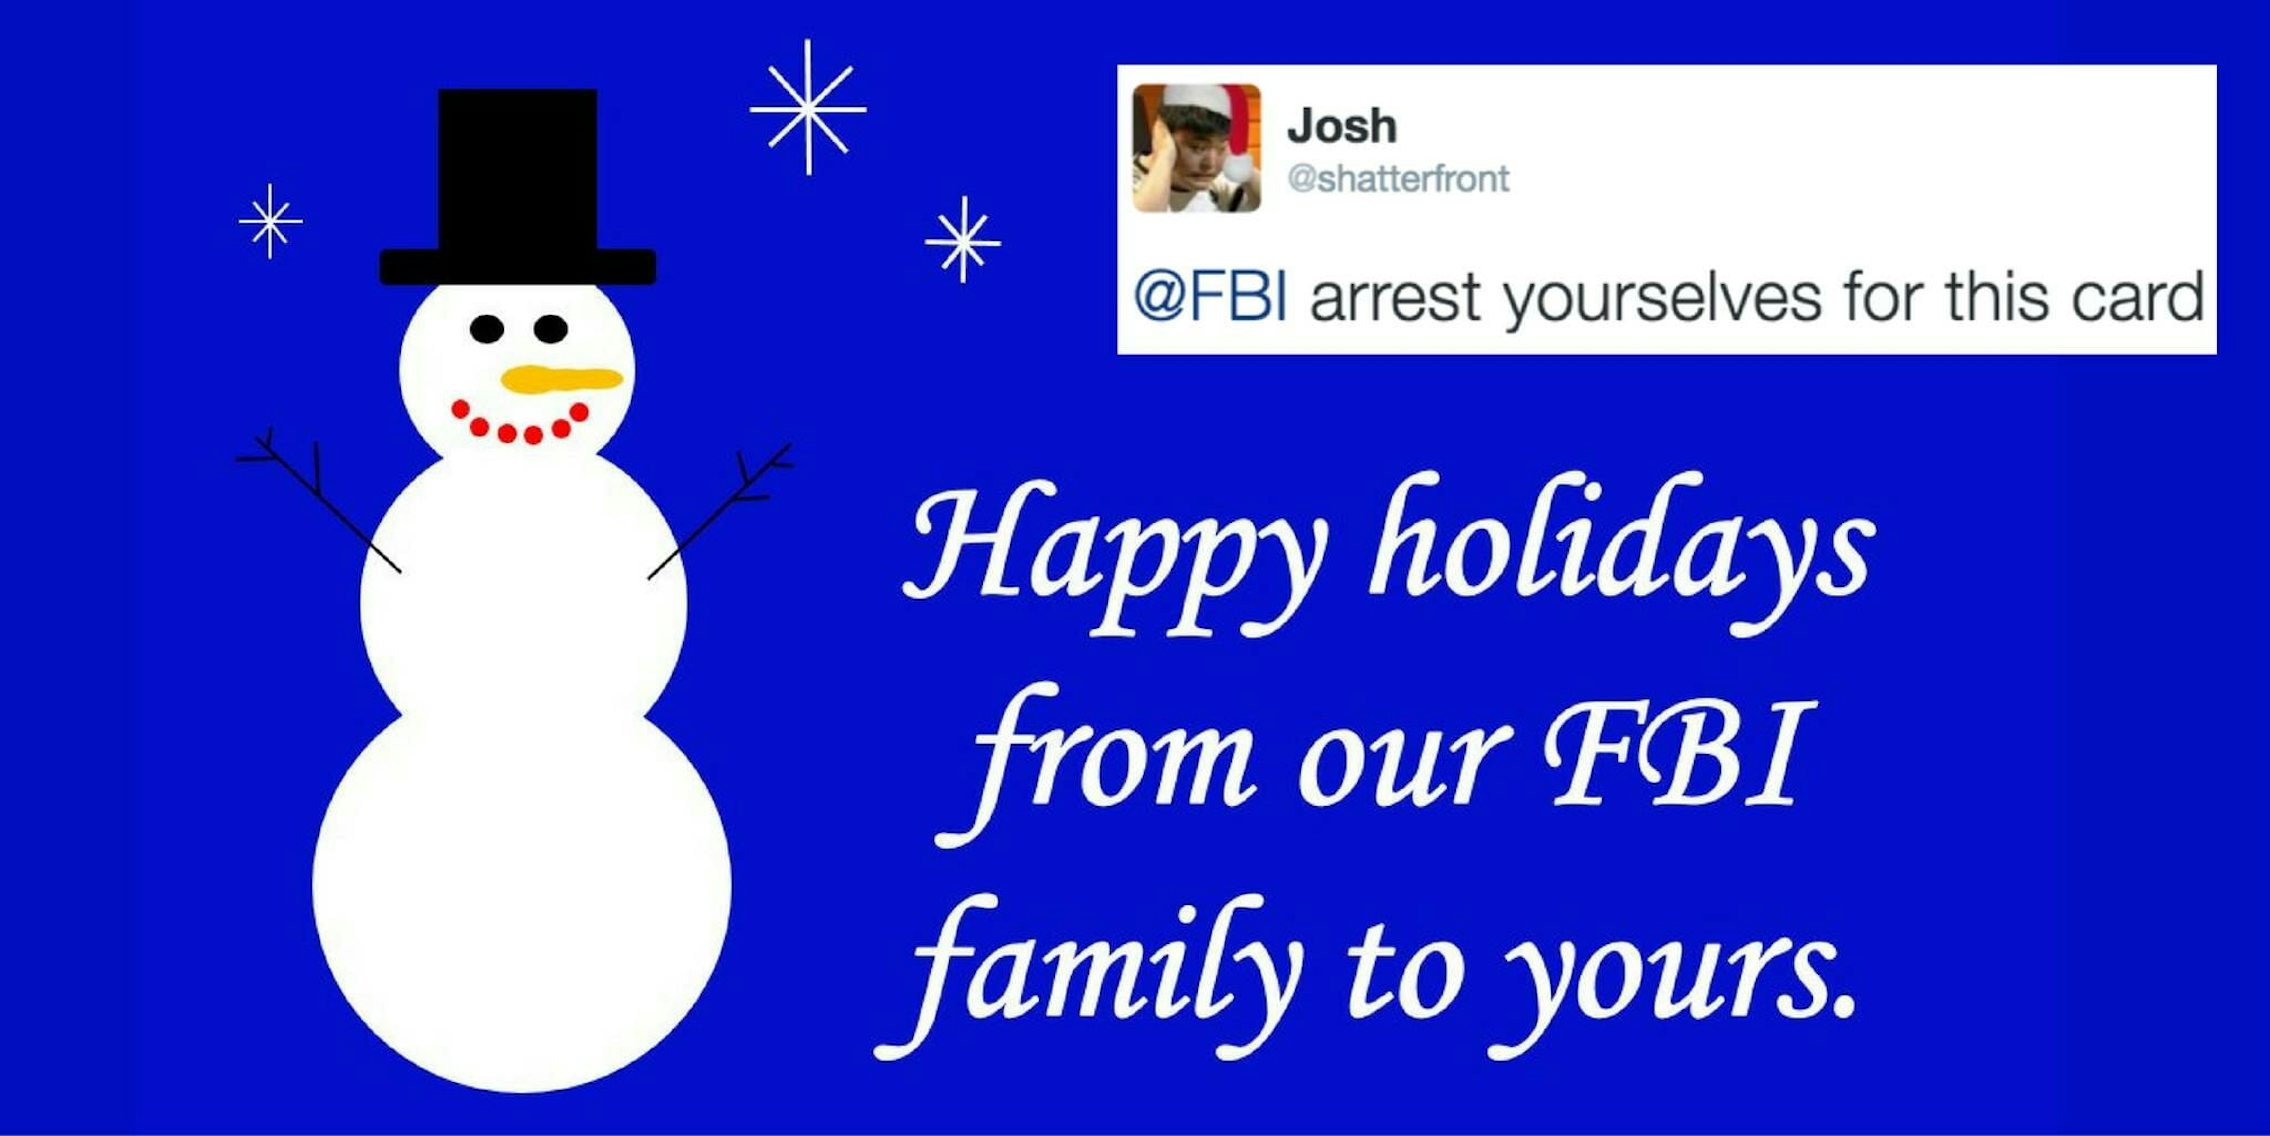 The hates the FBI's terrible 'Happy Holidays' graphic